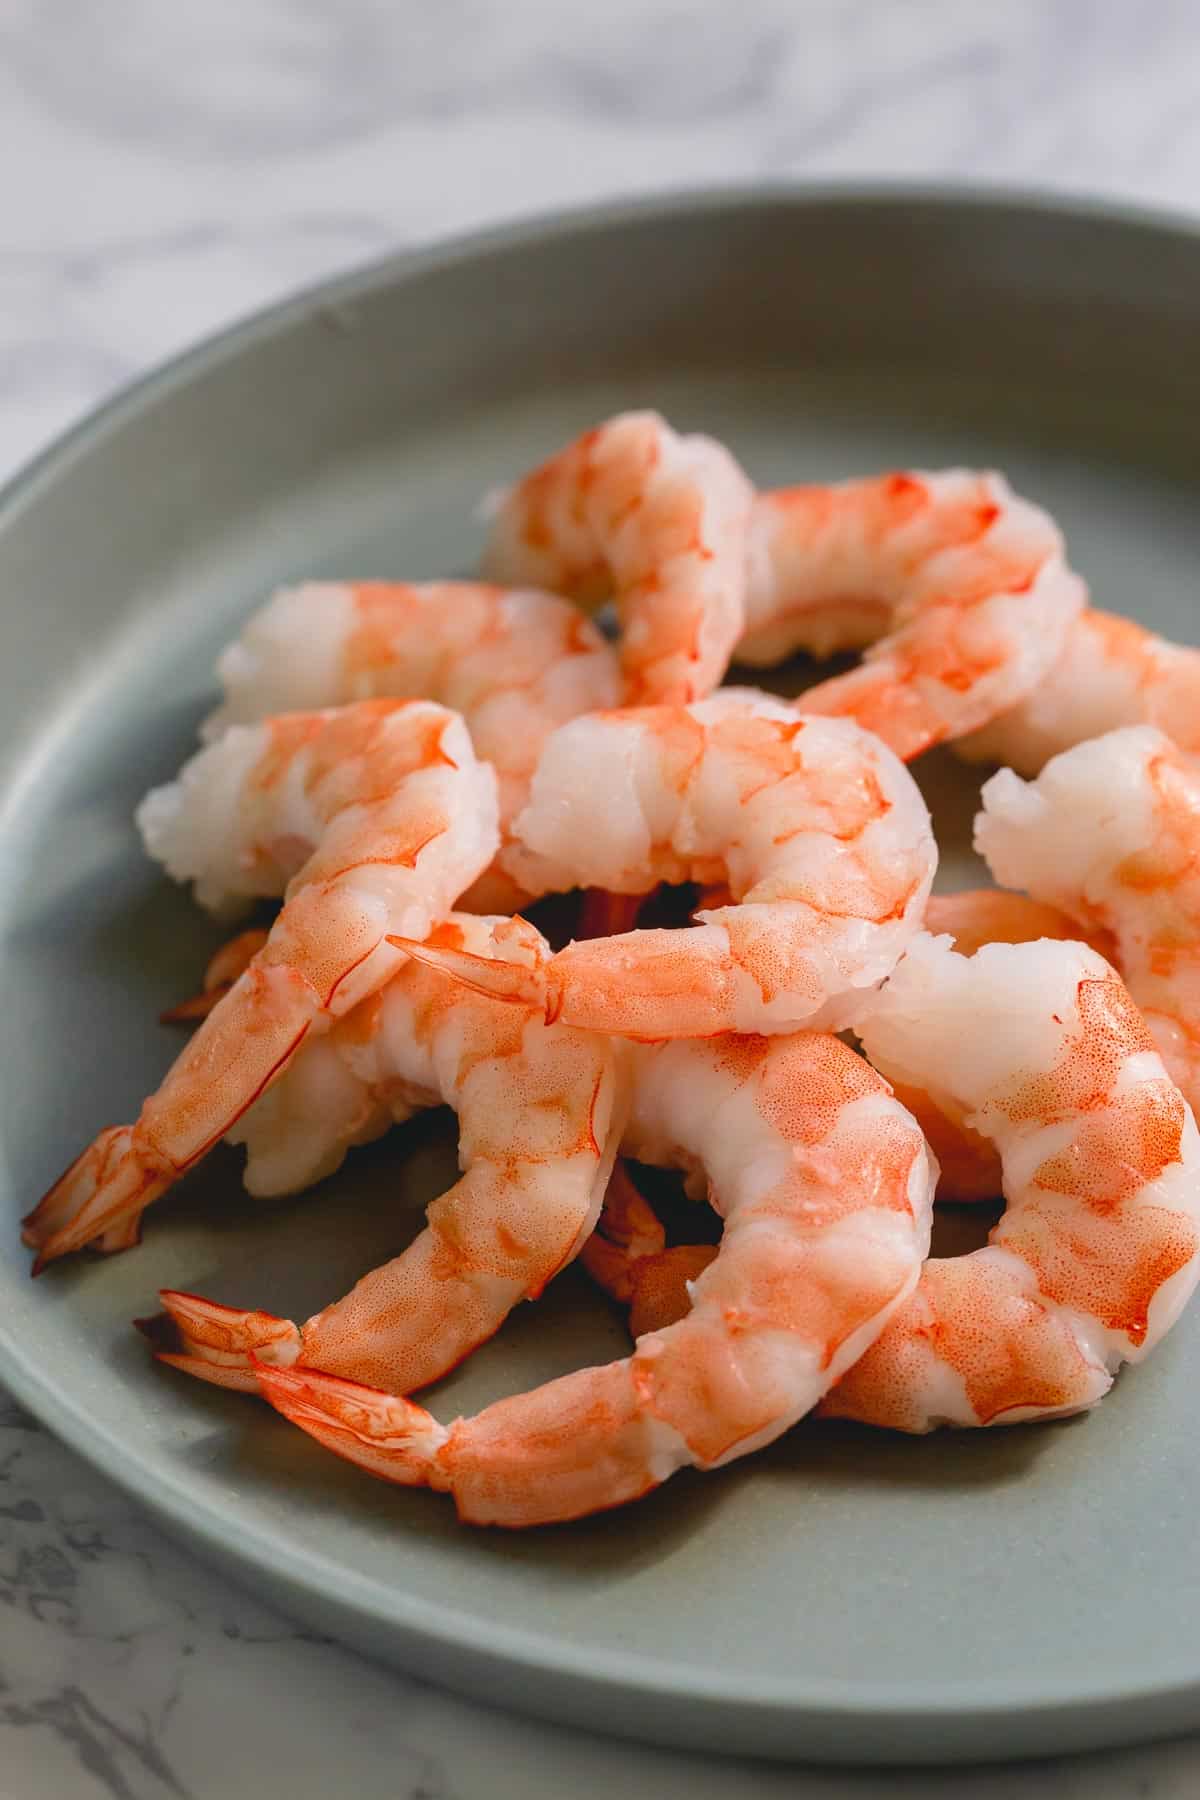 A pile of cooked shrimp on a plate